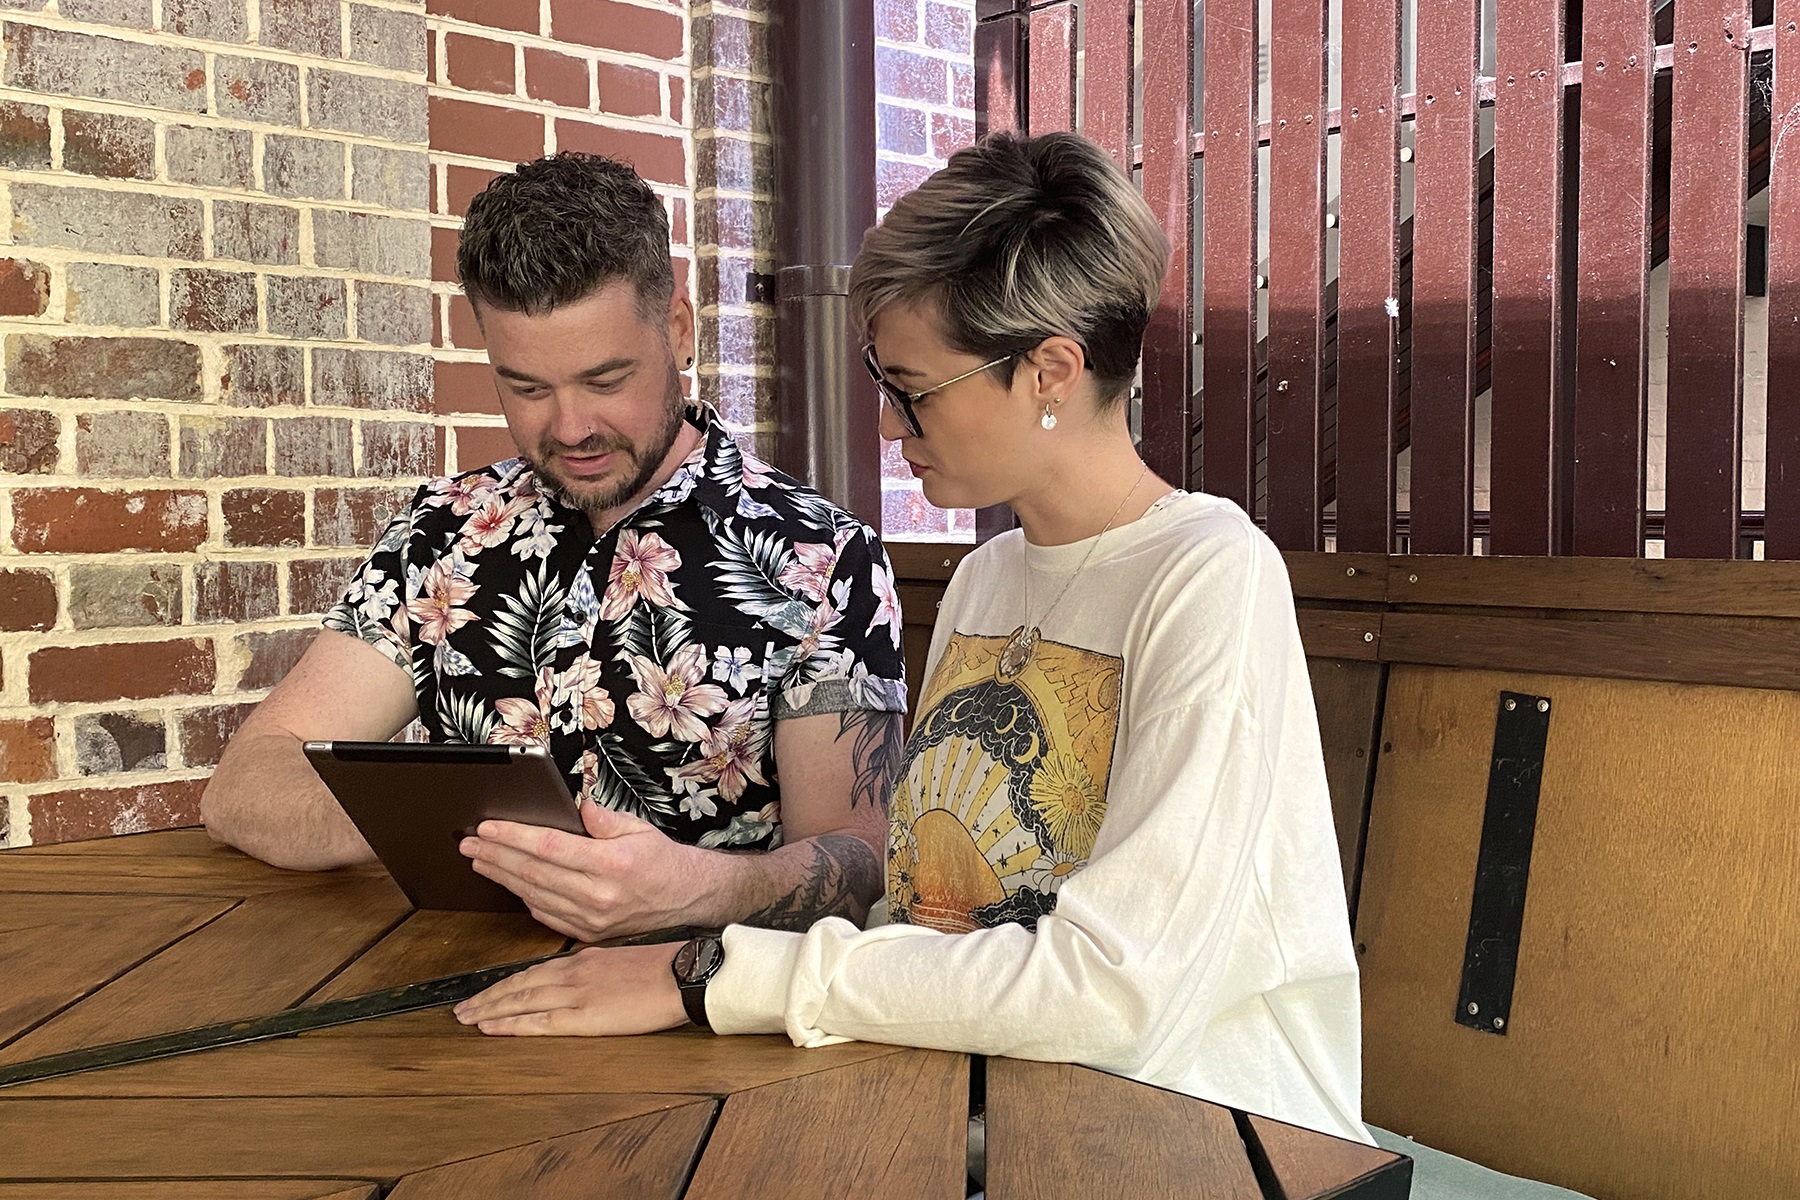 Photo of a man and woman sitting together at a table and looking at a tablet device.